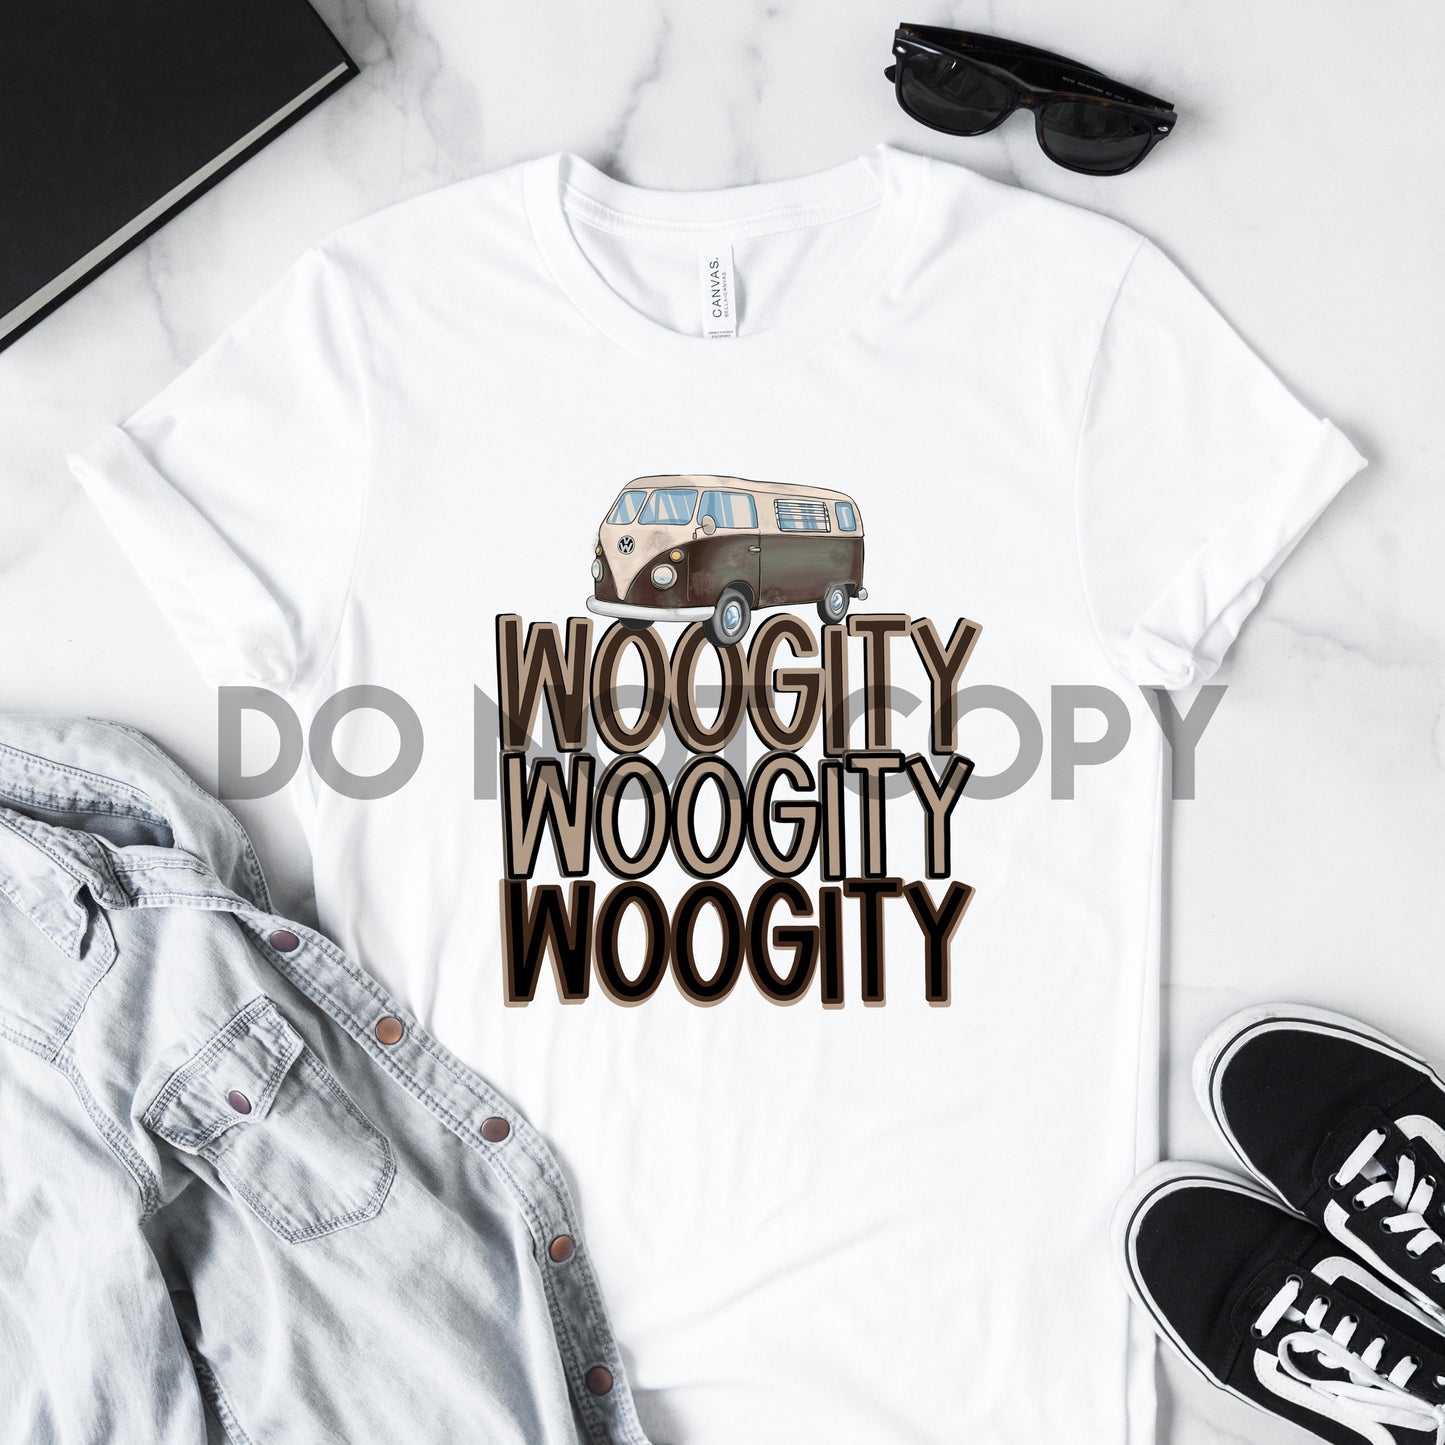 Woogity Woogity Woogity Sublimation Print